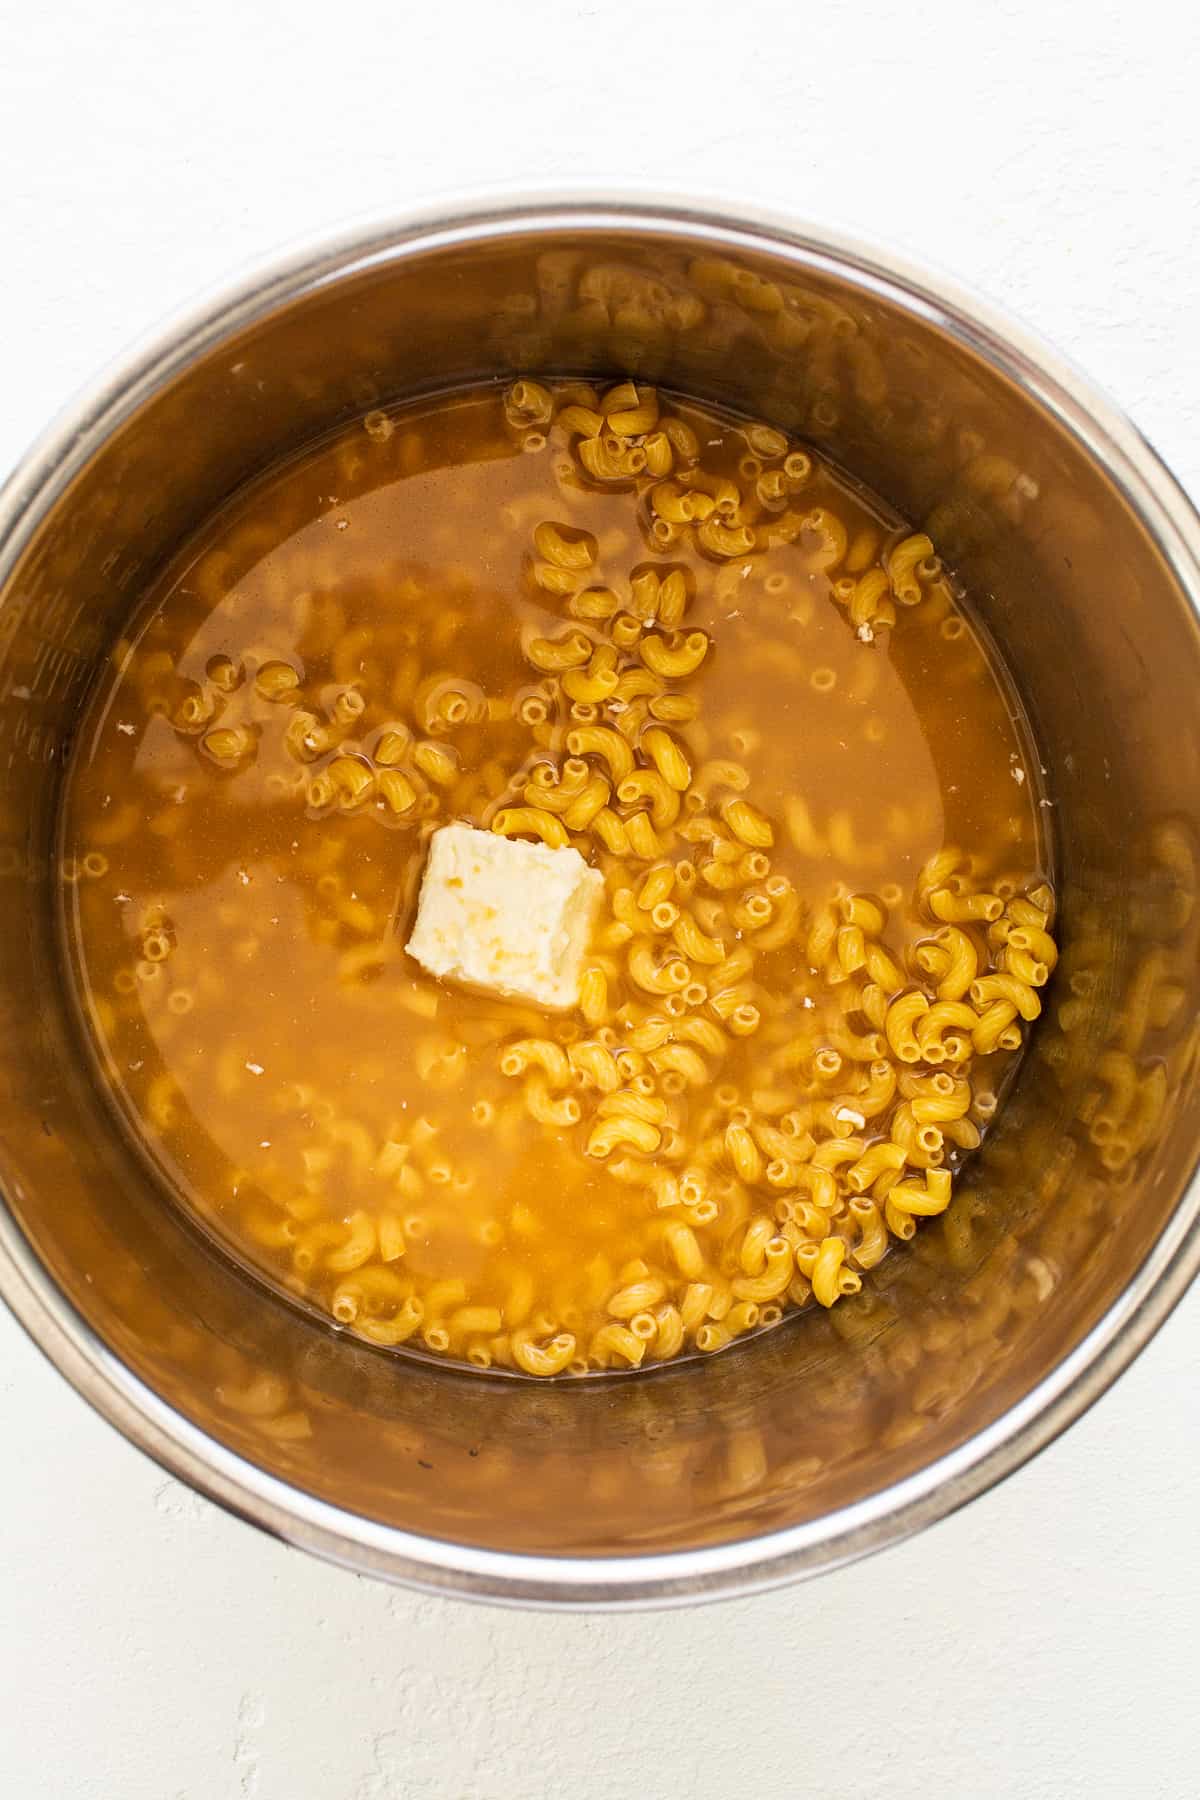 noodles, butter, and broth in Instant Pot.